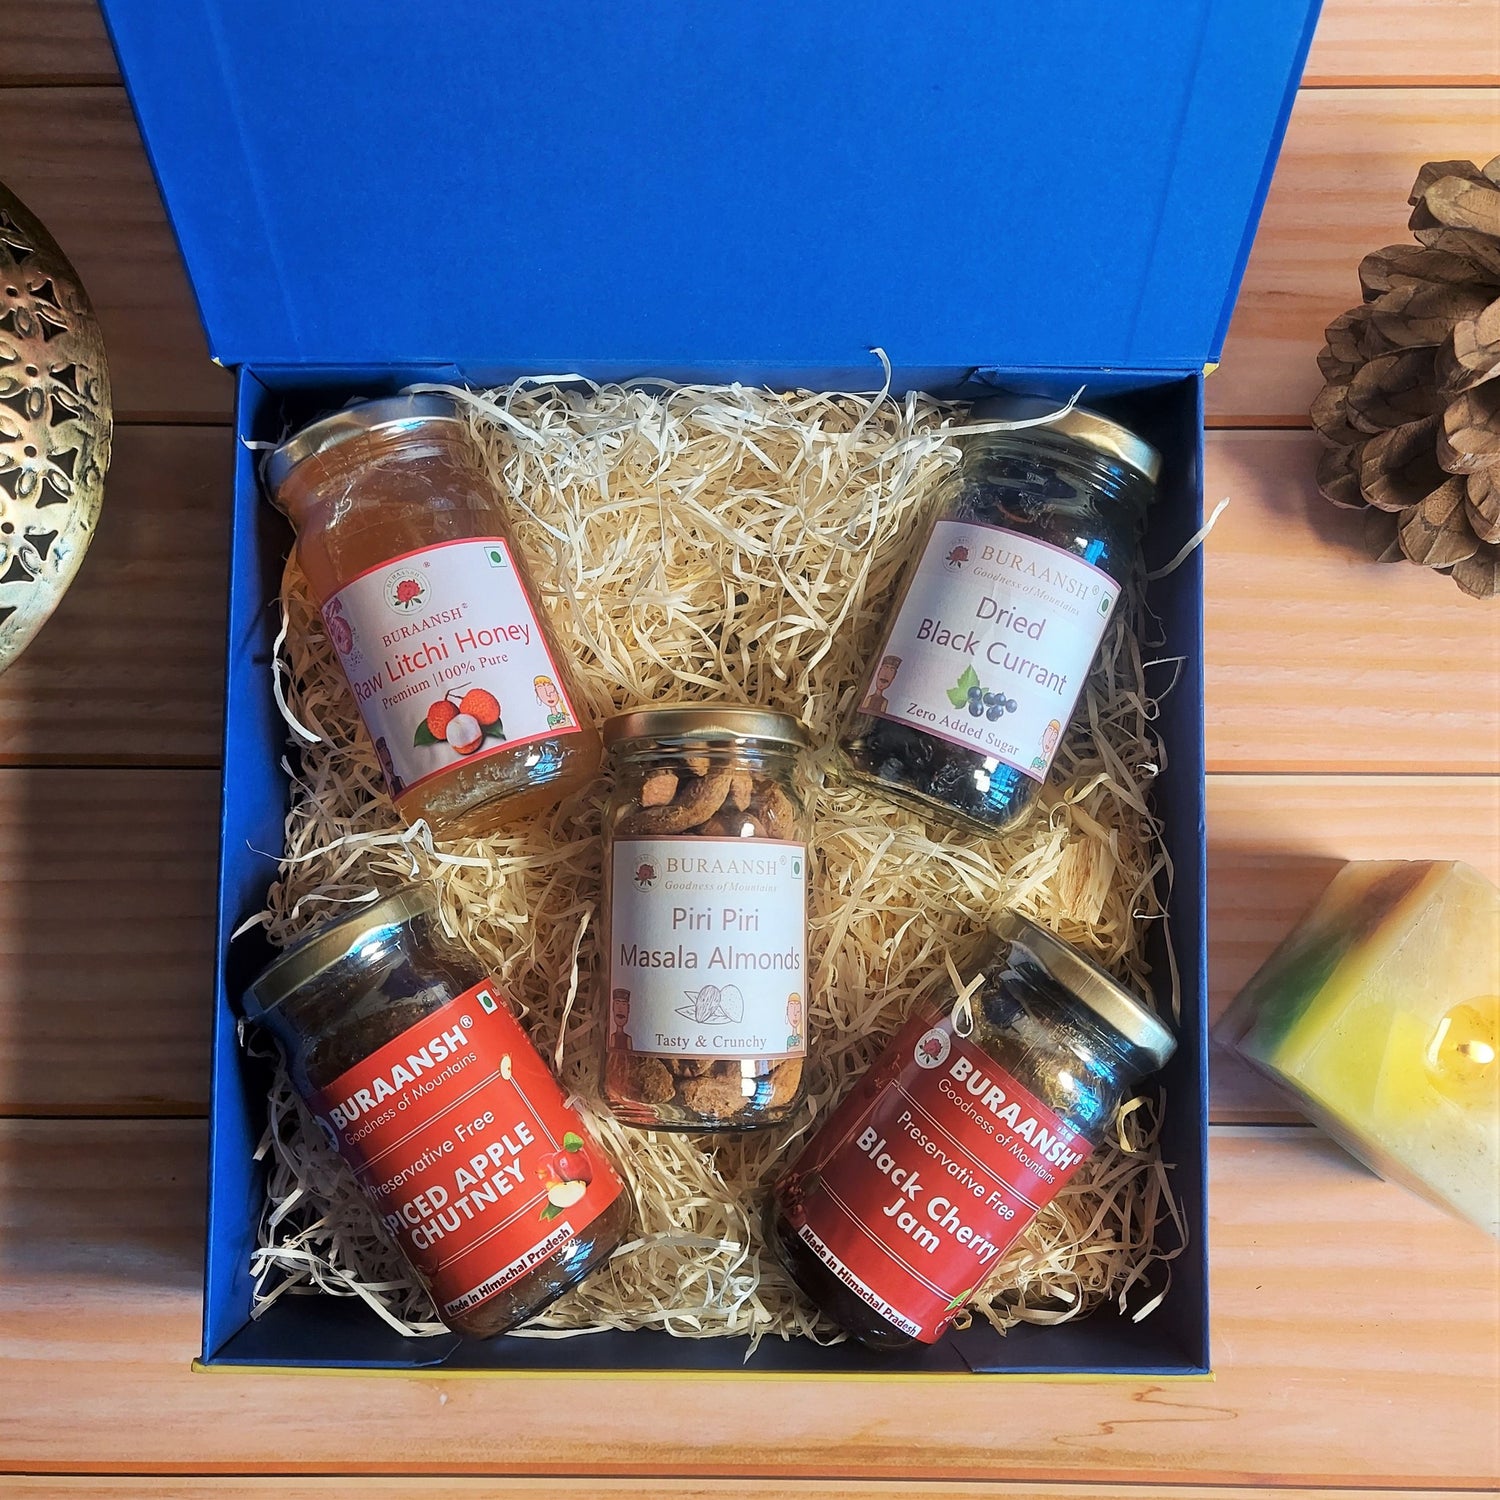 5 best himalayan products gift box for diwali